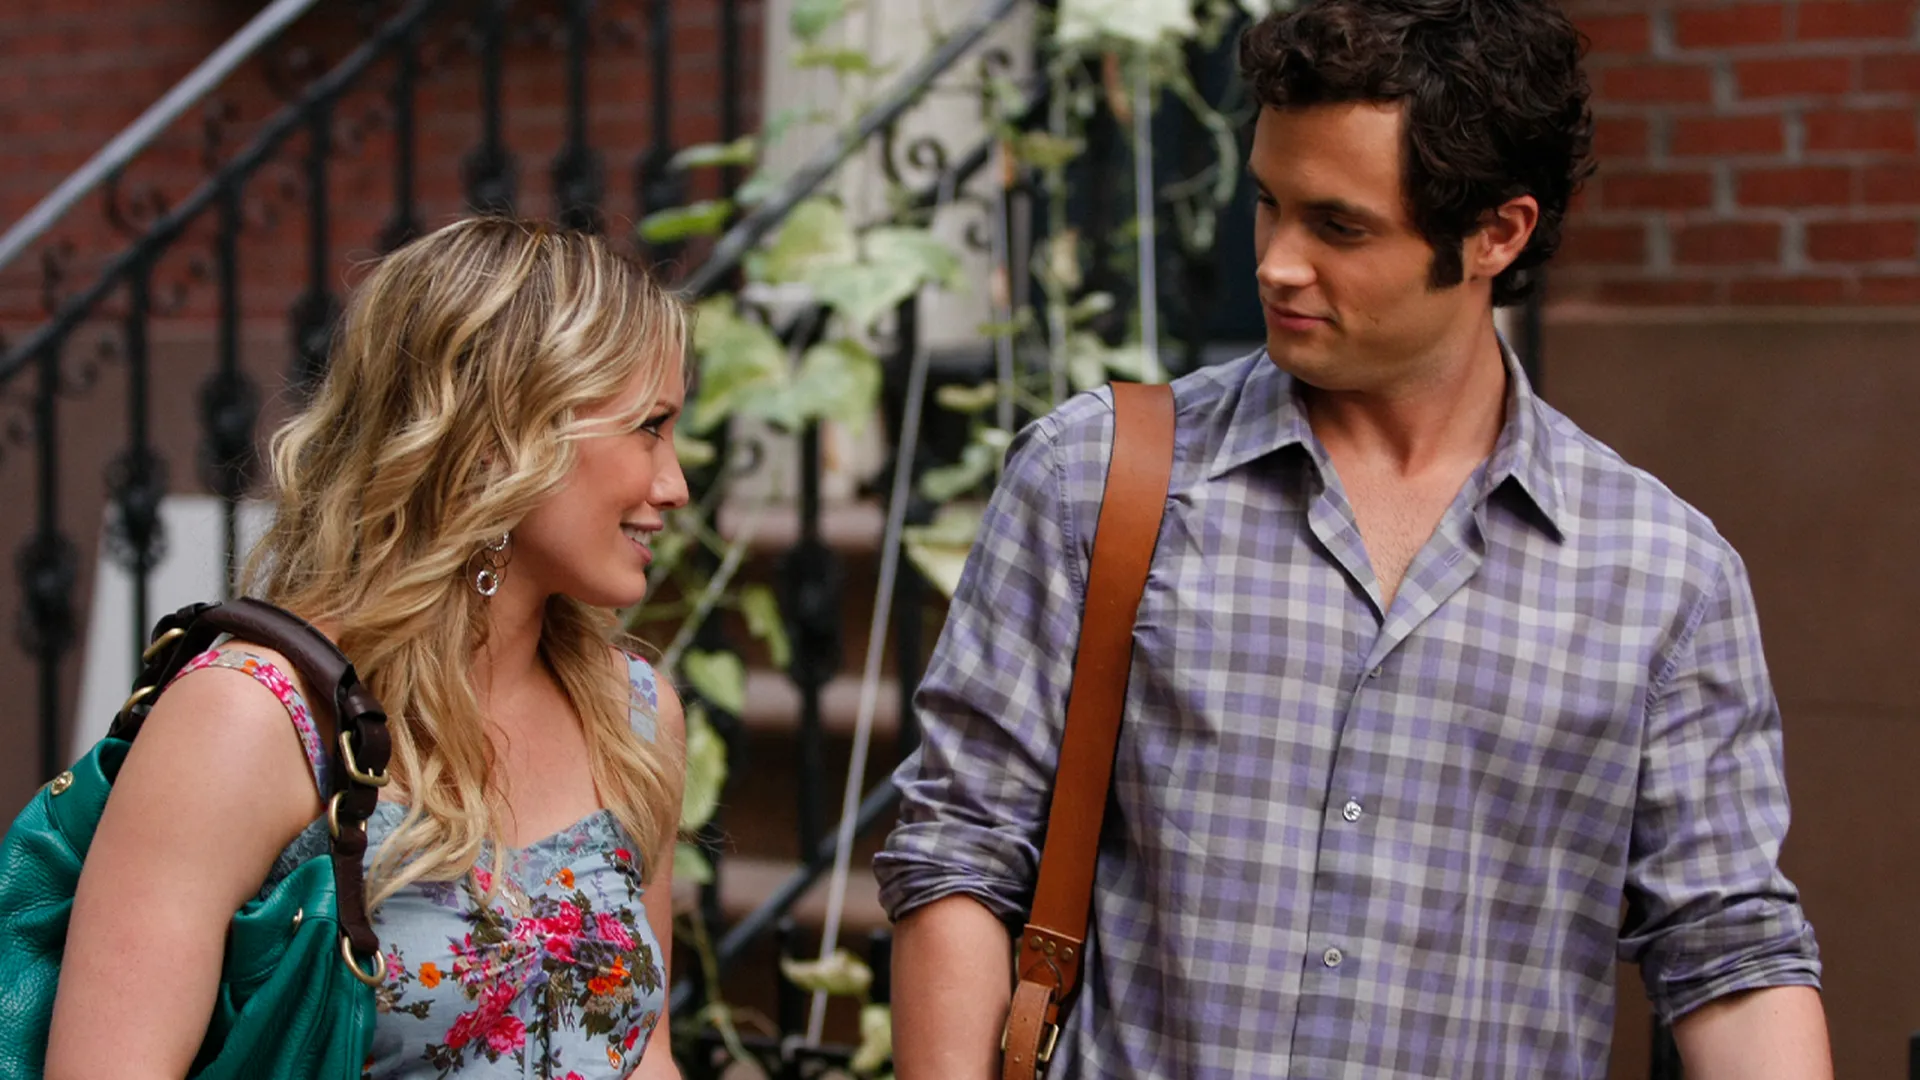 Watch Gossip Girl Season 3 Episode 6 - Enough About Eve Online Now